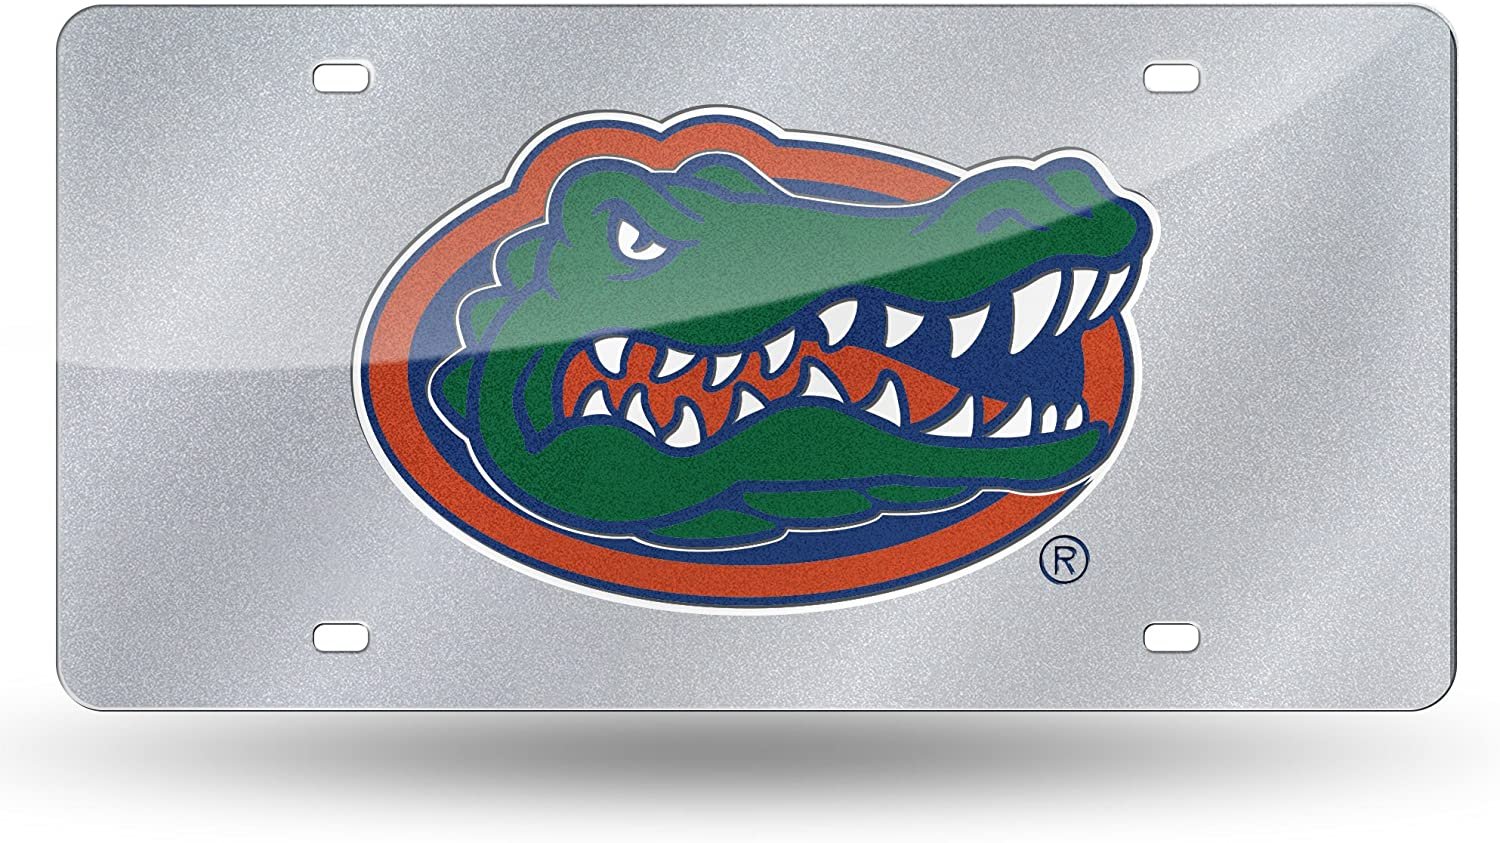 University of Florida Gators Laser Cut Tag License Plate, Bling Design, Mirrored Acrylic Inlaid, 12x6 Inch